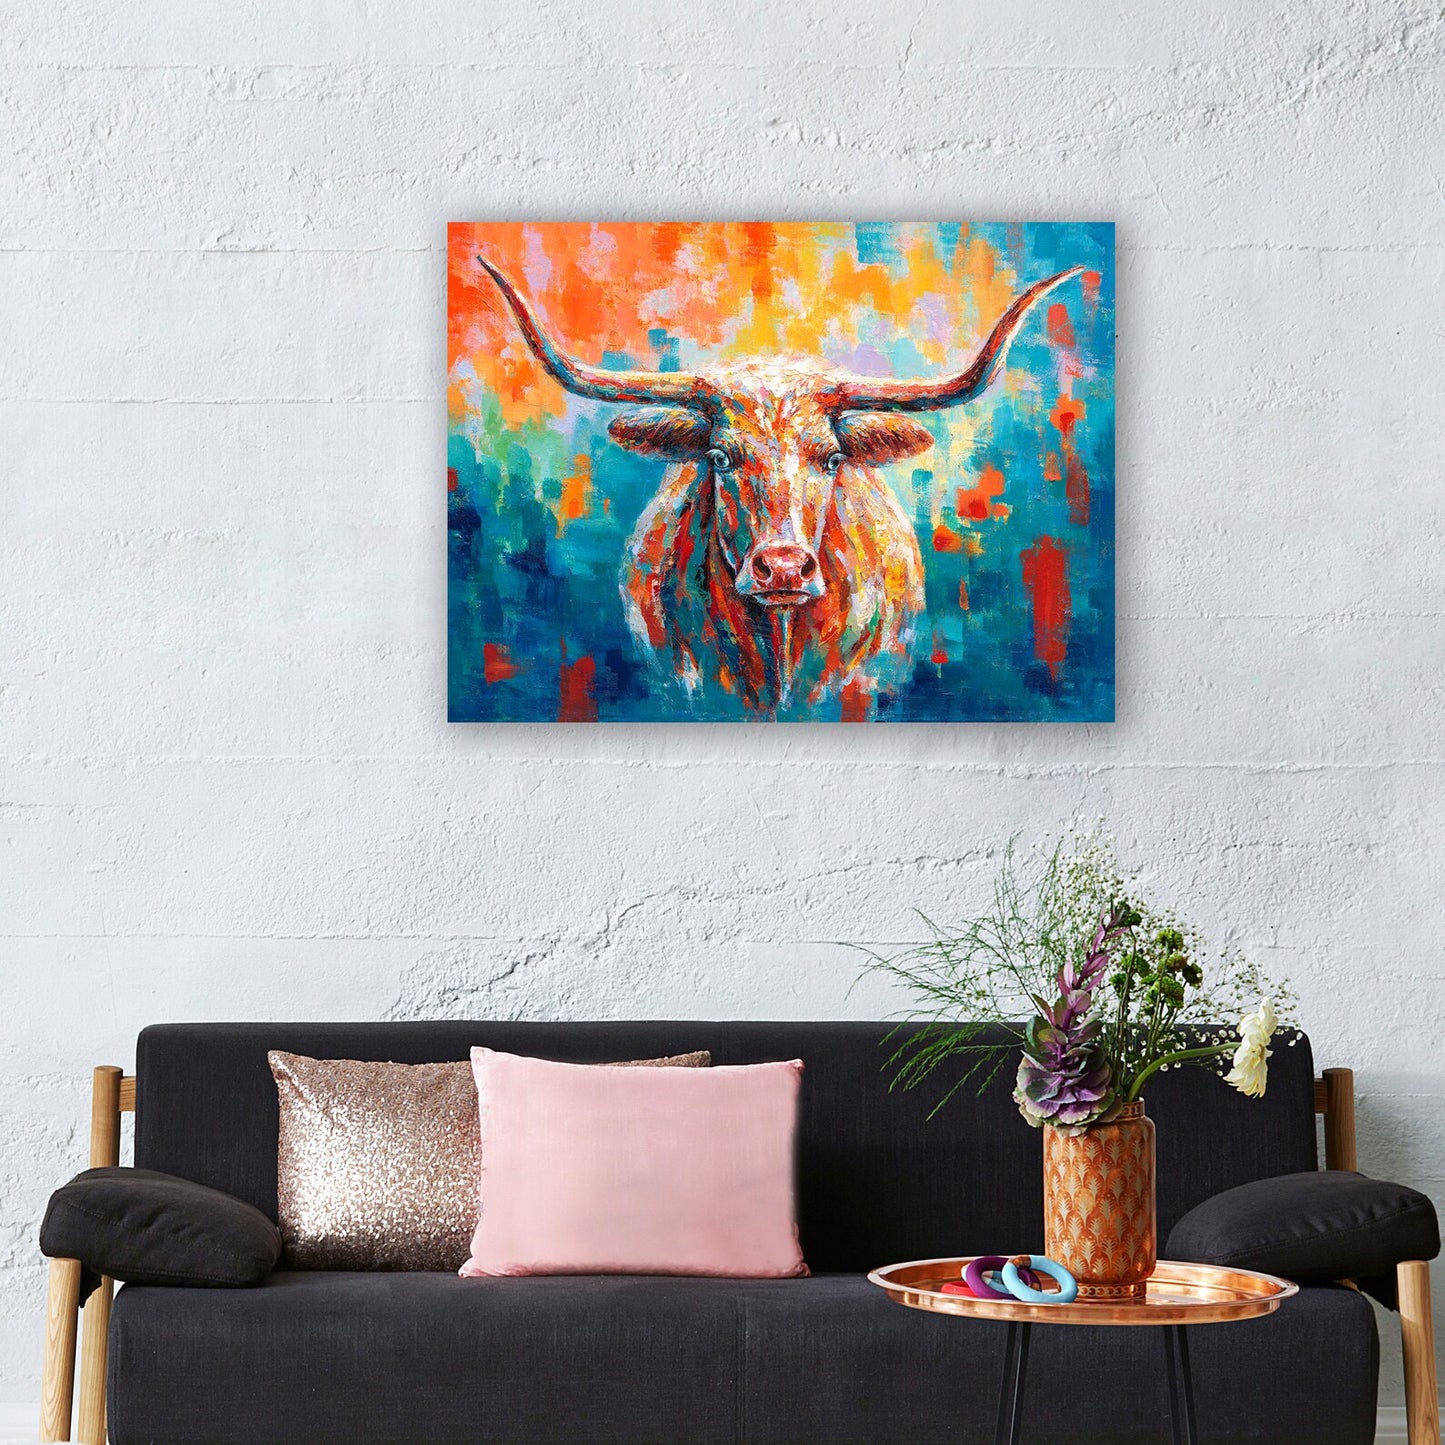 hand-painted "American Bull" oil painting oiginal art, Wall art for living room, bedroom, office - Wrapped Canvas Painting